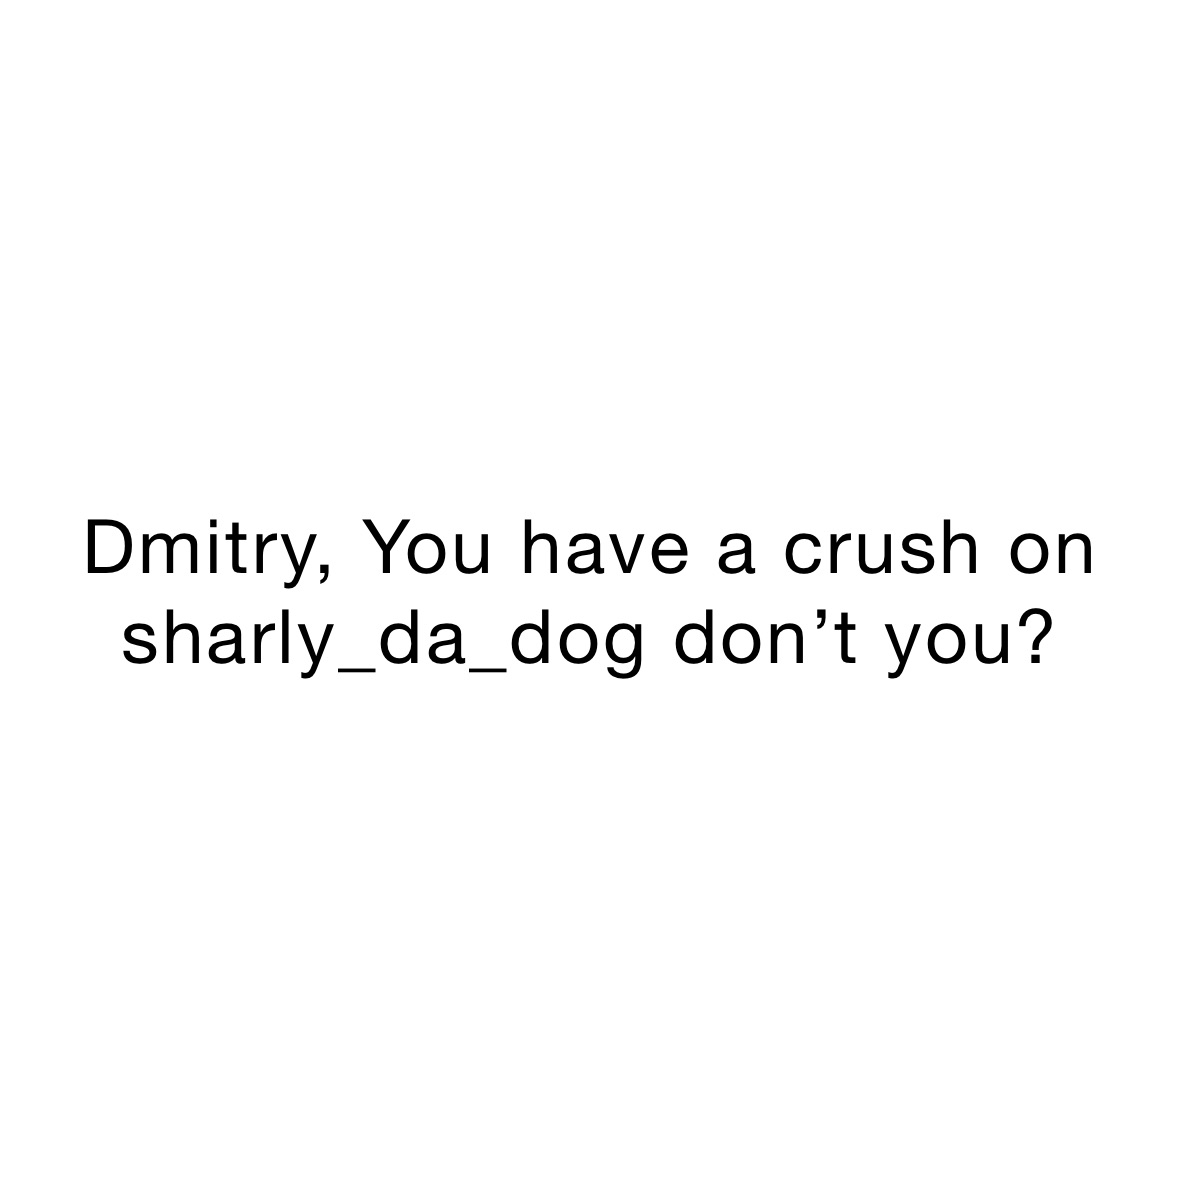 Dmitry, You have a crush on sharly_da_dog don’t you? 